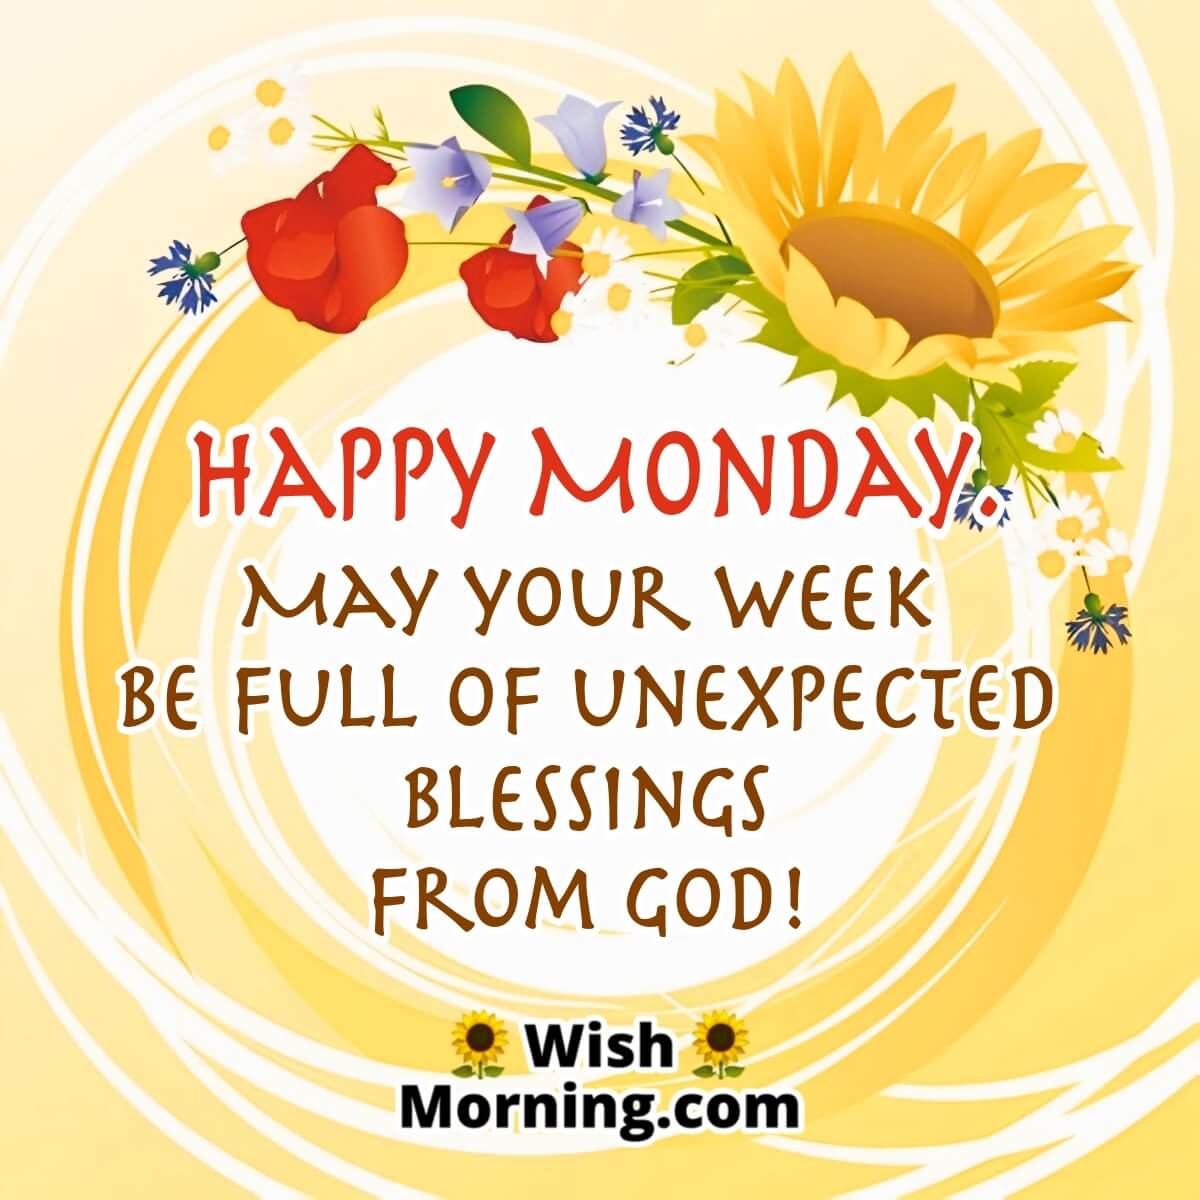 Happy Monday Blessings